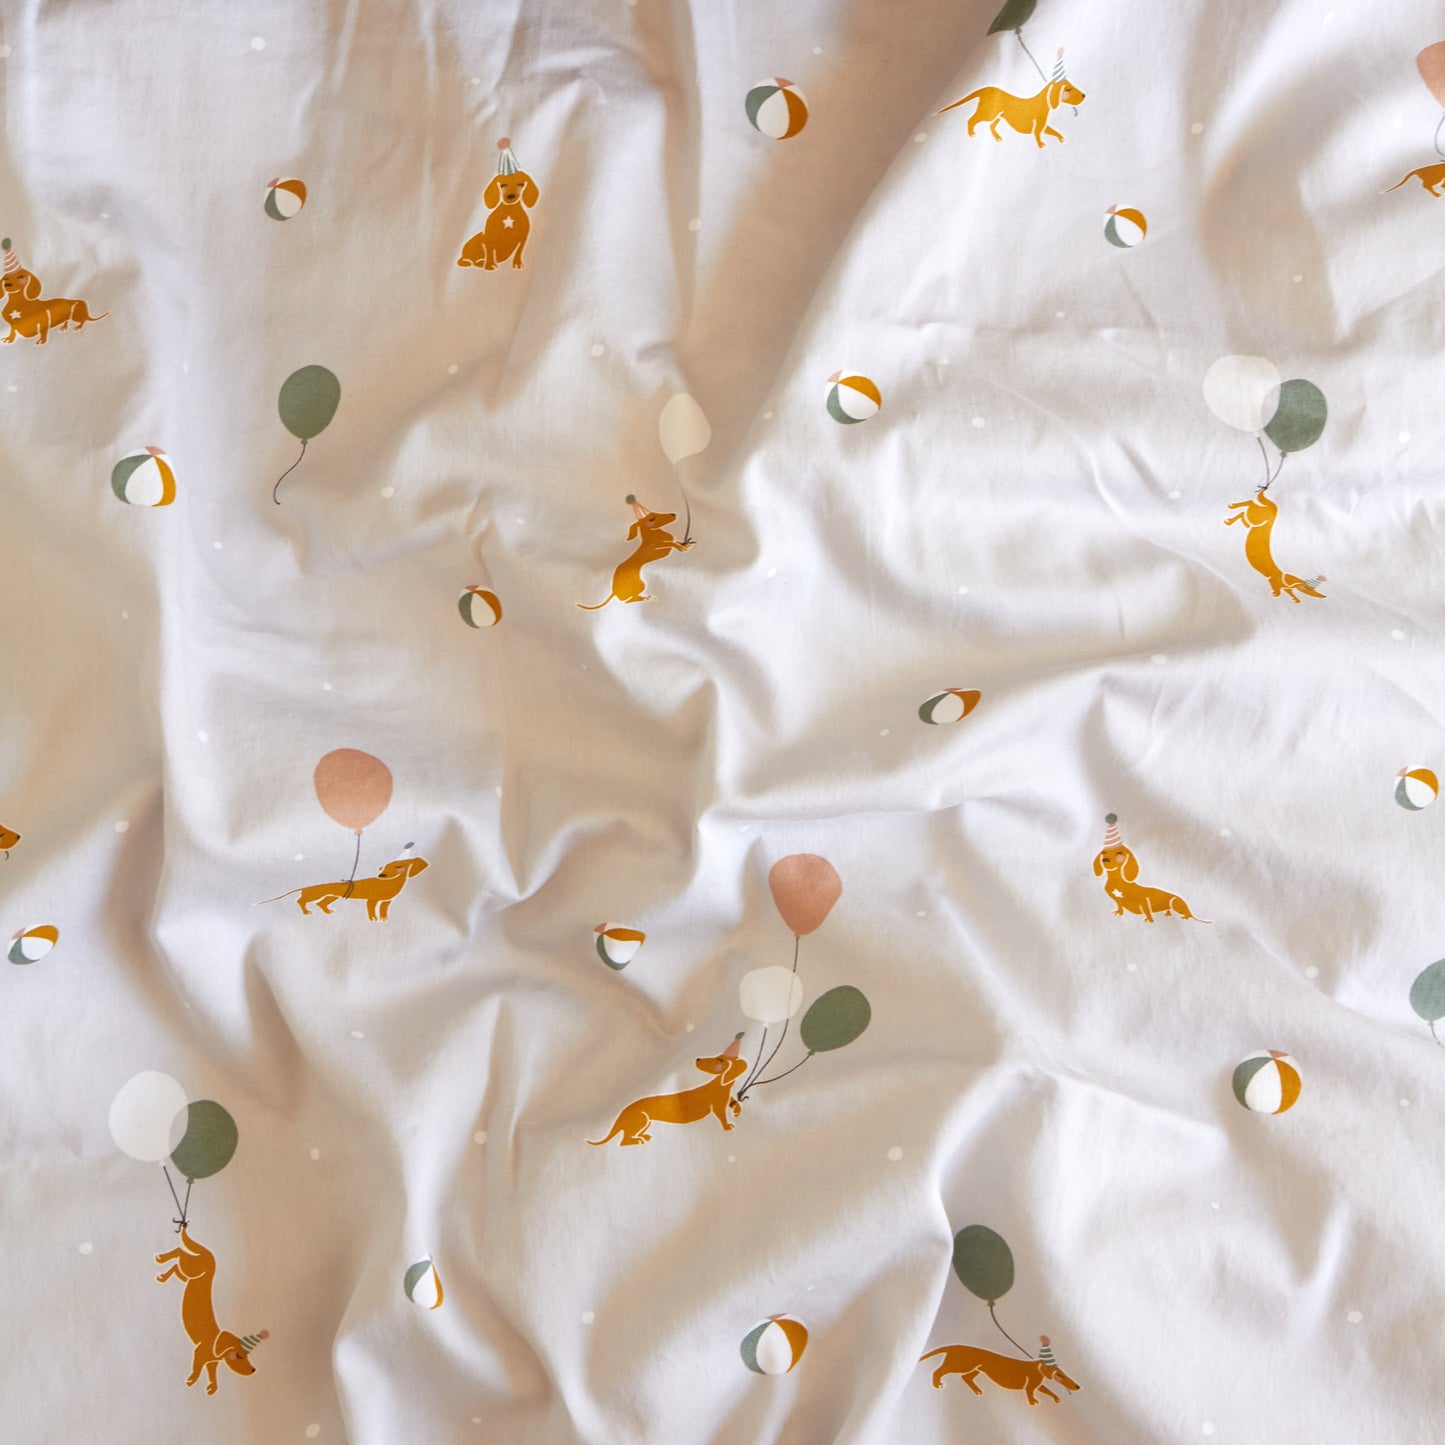 MAGIC DOGS BABY BED LINEN - GOTS